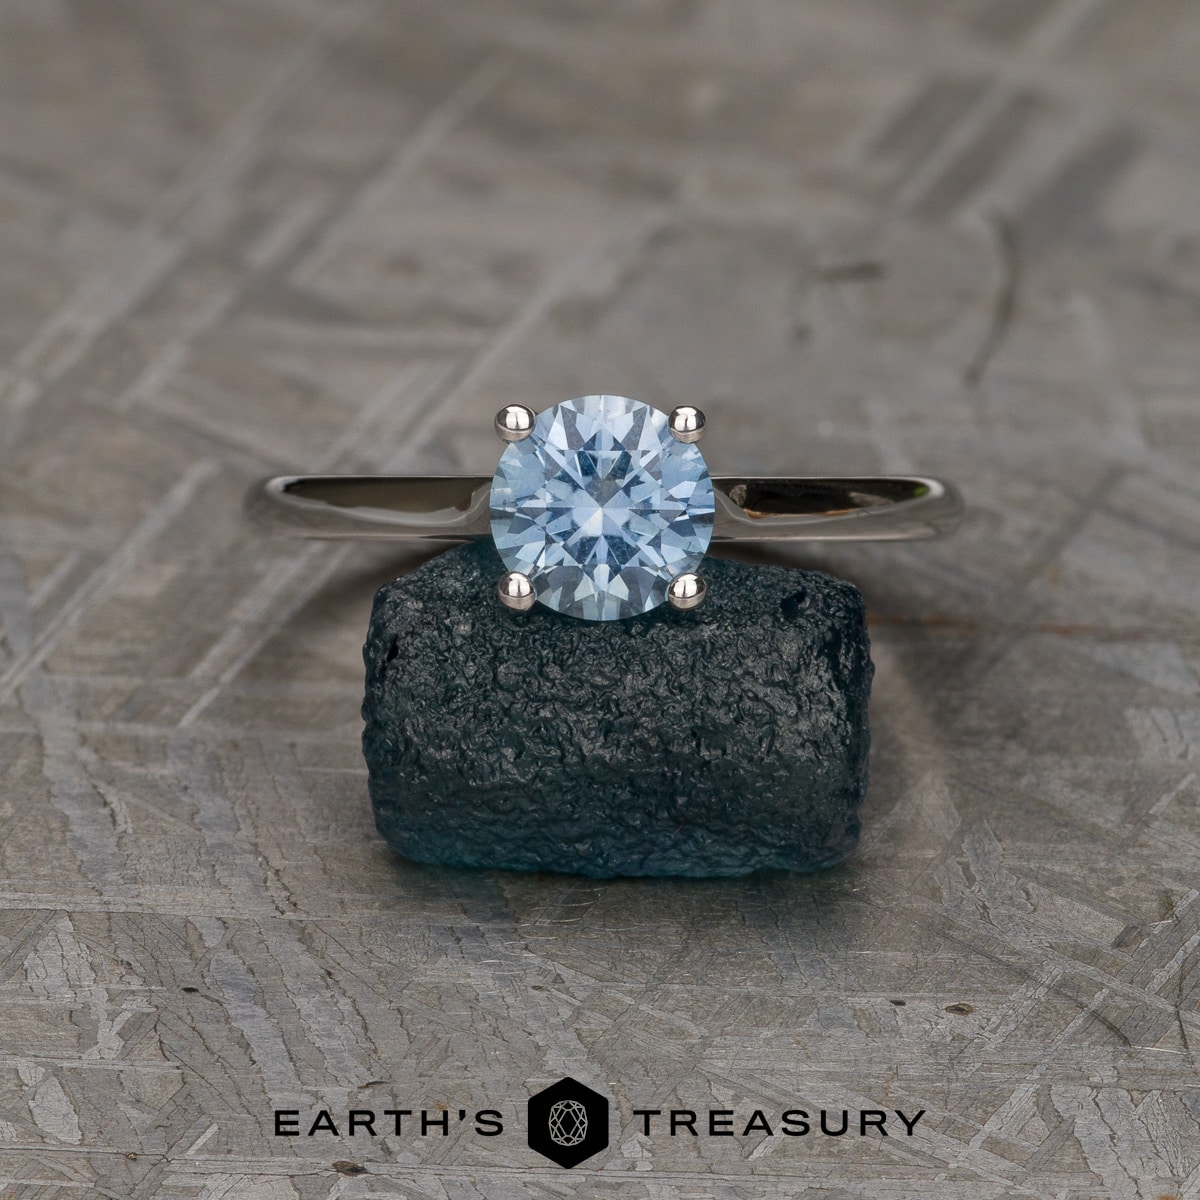 The "Cathedral" ring in 14k white gold with 1.17-Carat Montana Sapphire